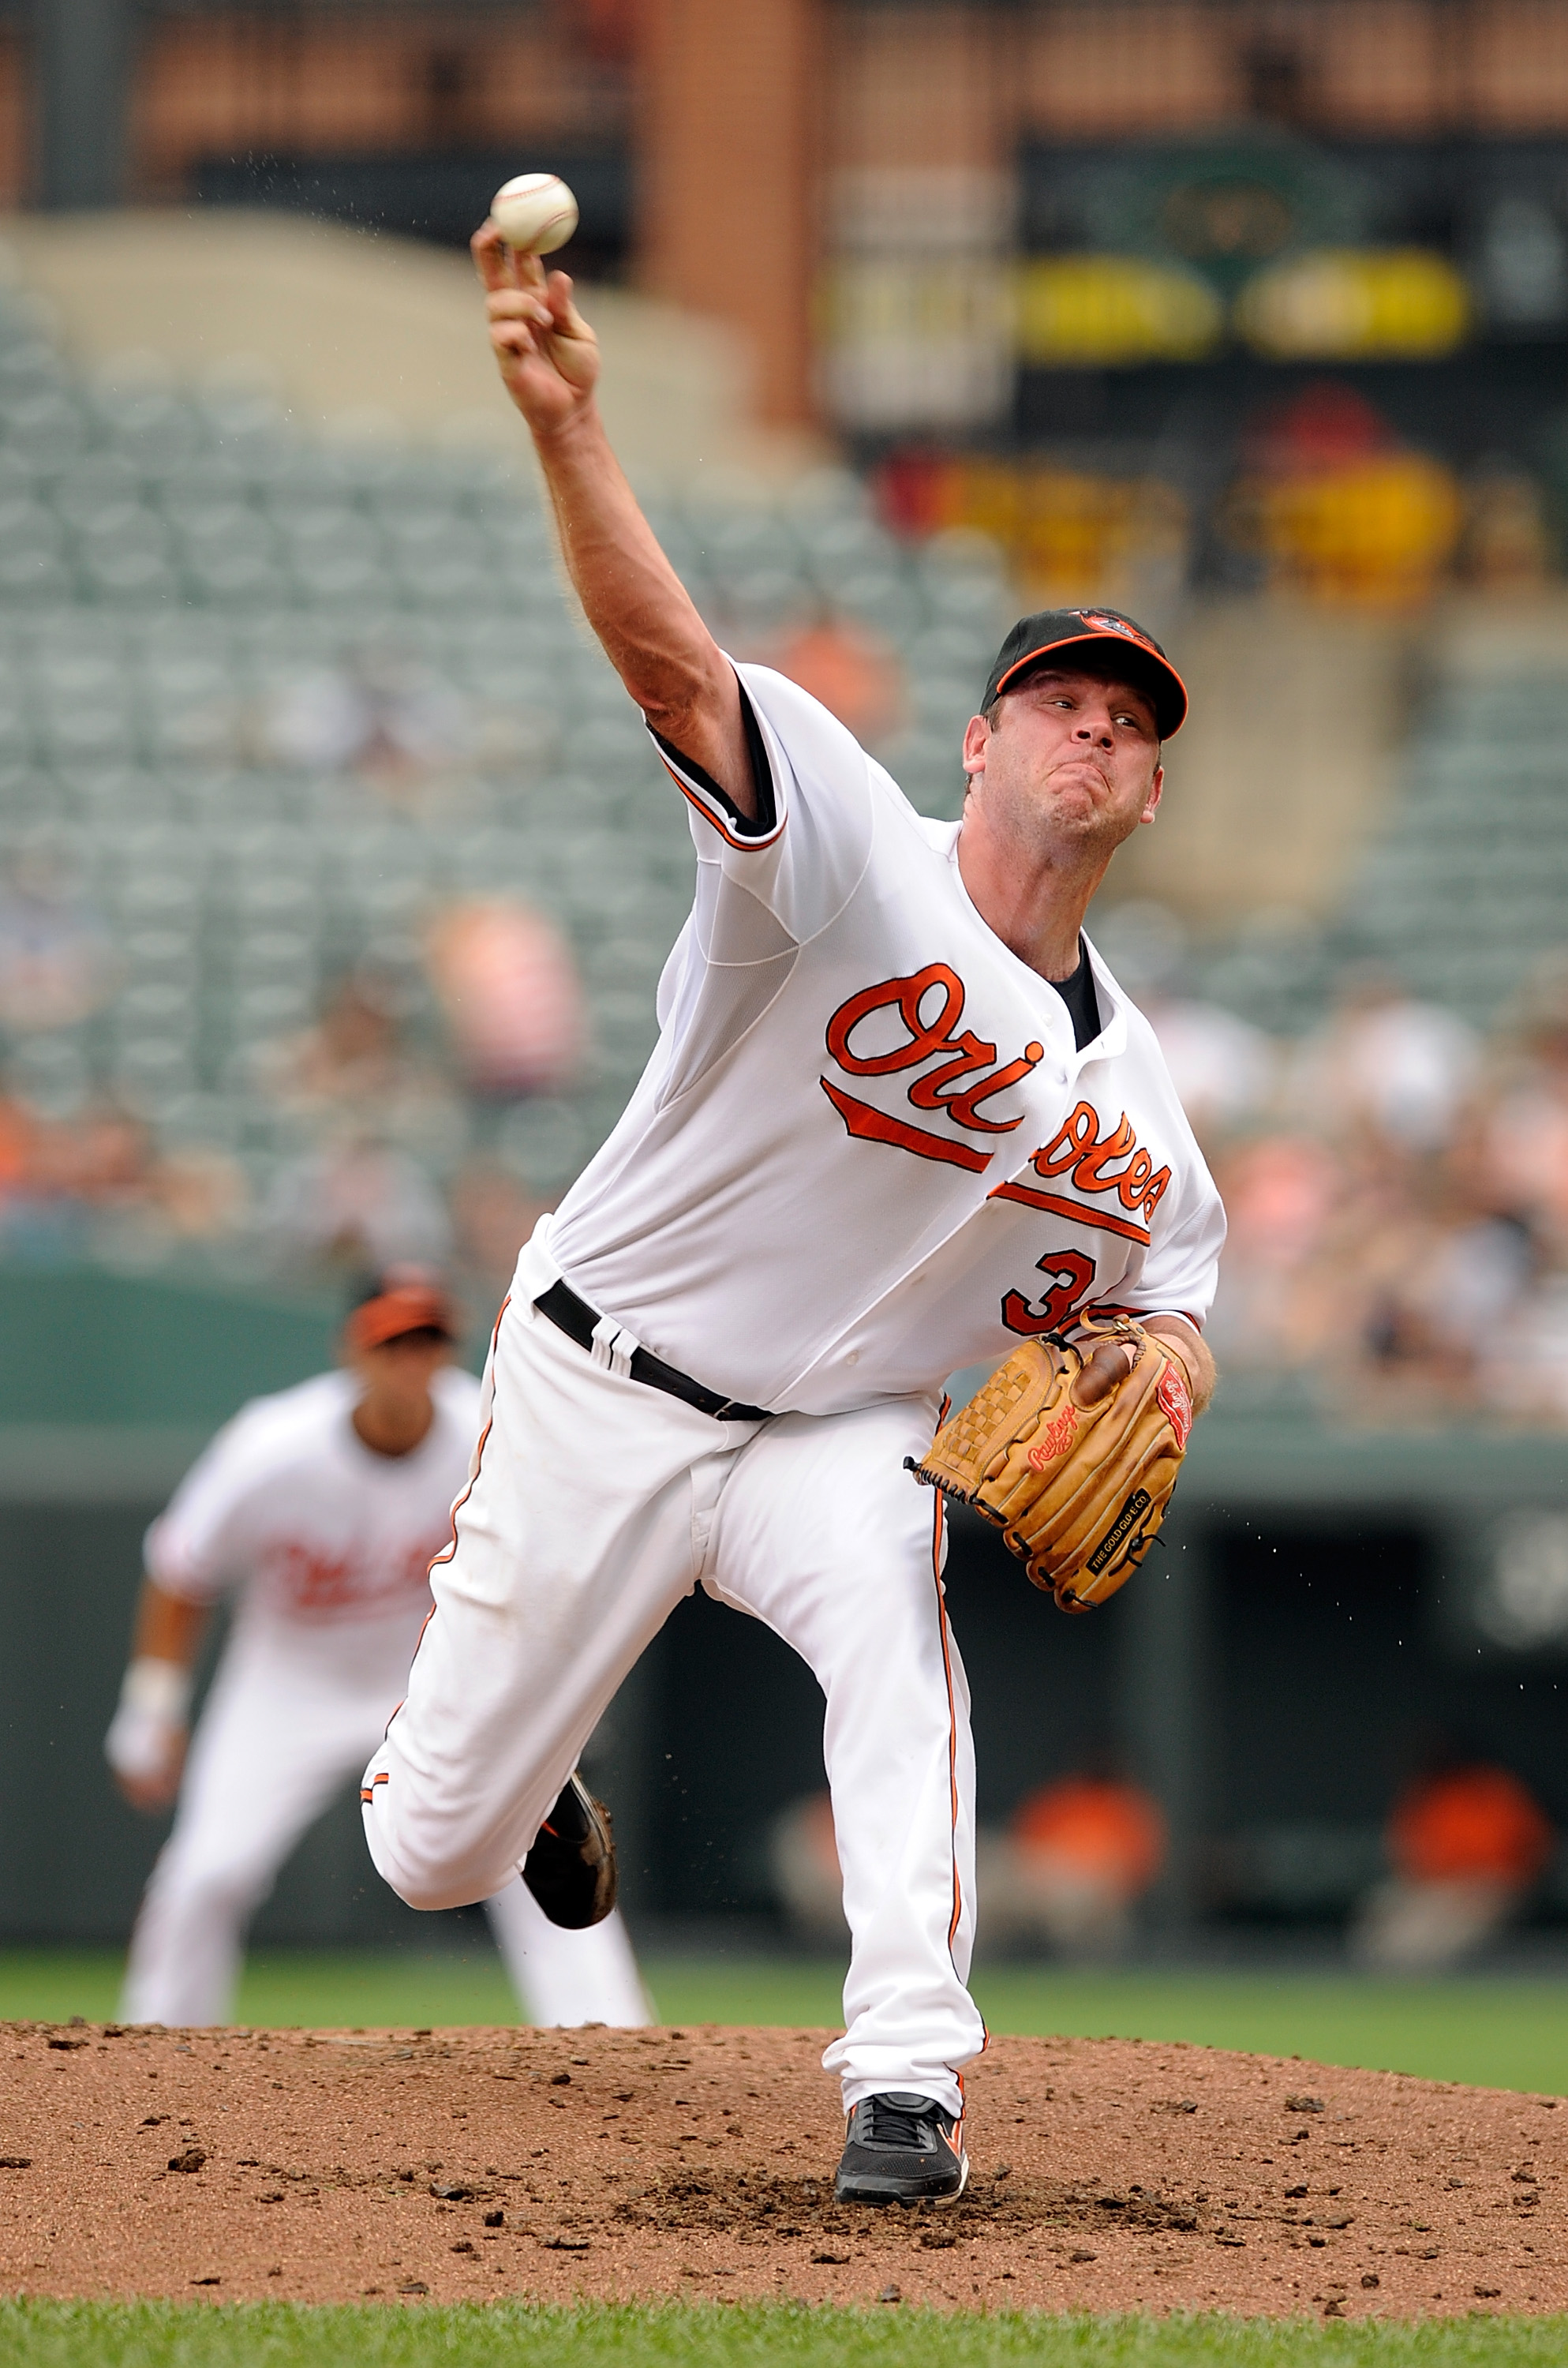 BALTIMORE - AUGUST 22:  Kevin Millwood #34 of the Baltimore Orioles pitches against the Texas Rangers at Camden Yards on August 22, 2010 in Baltimore, Maryland.  (Photo by Greg Fiume/Getty Images)